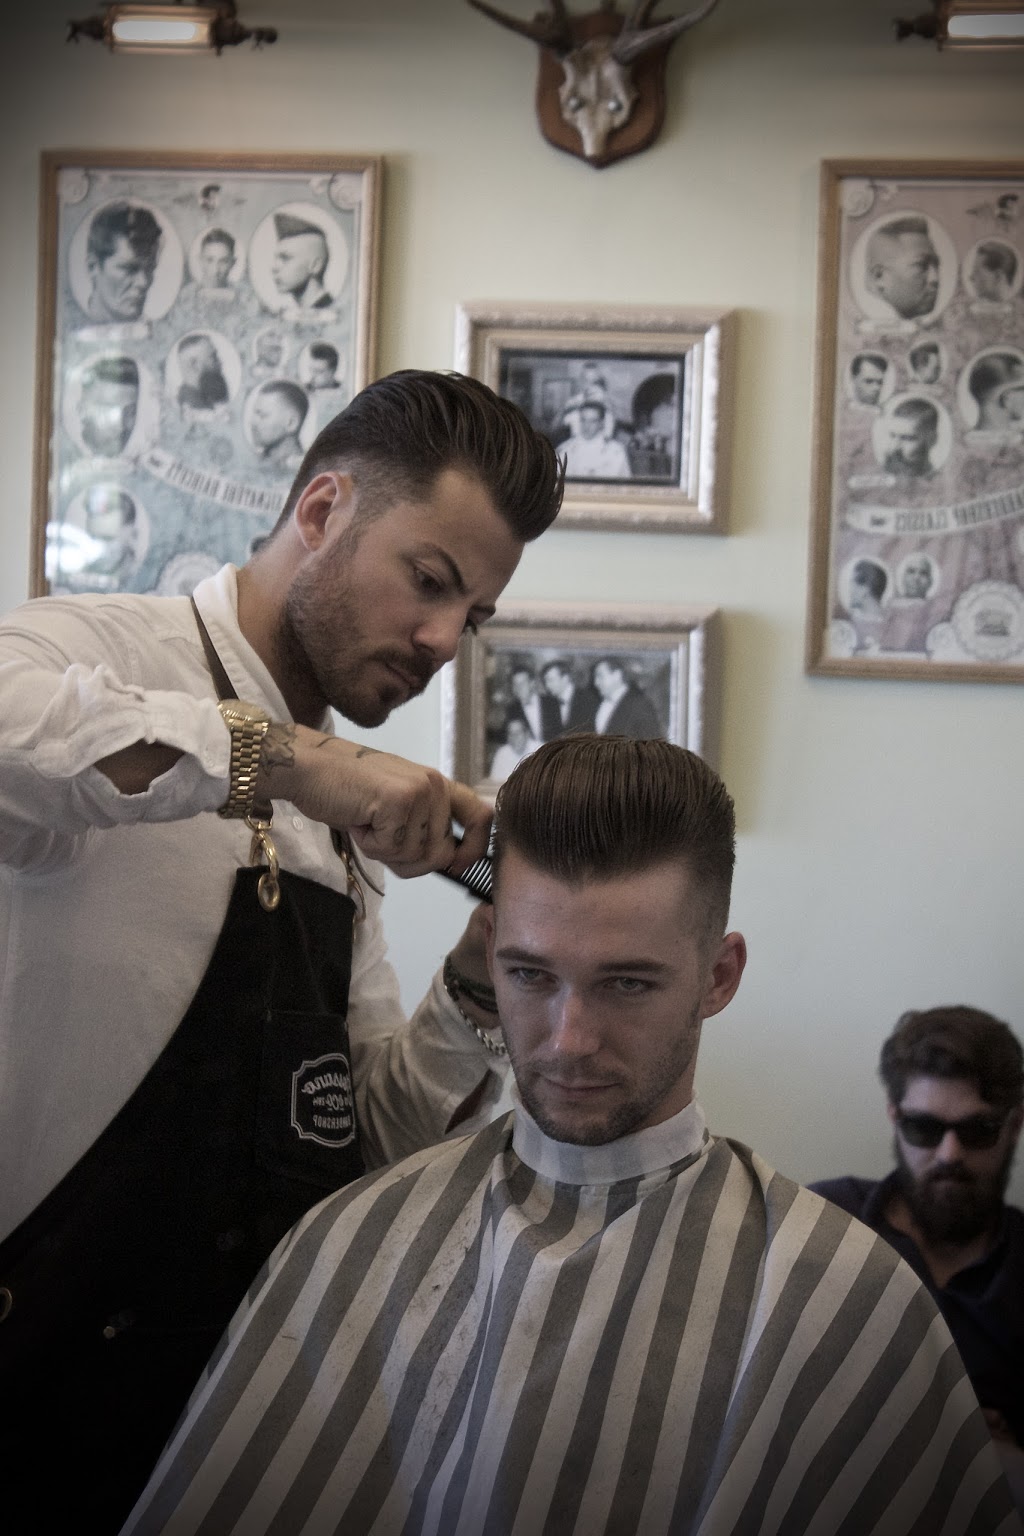 Fossano & Co Barbershop | hair care | 1775 Pittwater Rd, Mona Vale NSW 2103, Australia | 0299995613 OR +61 2 9999 5613